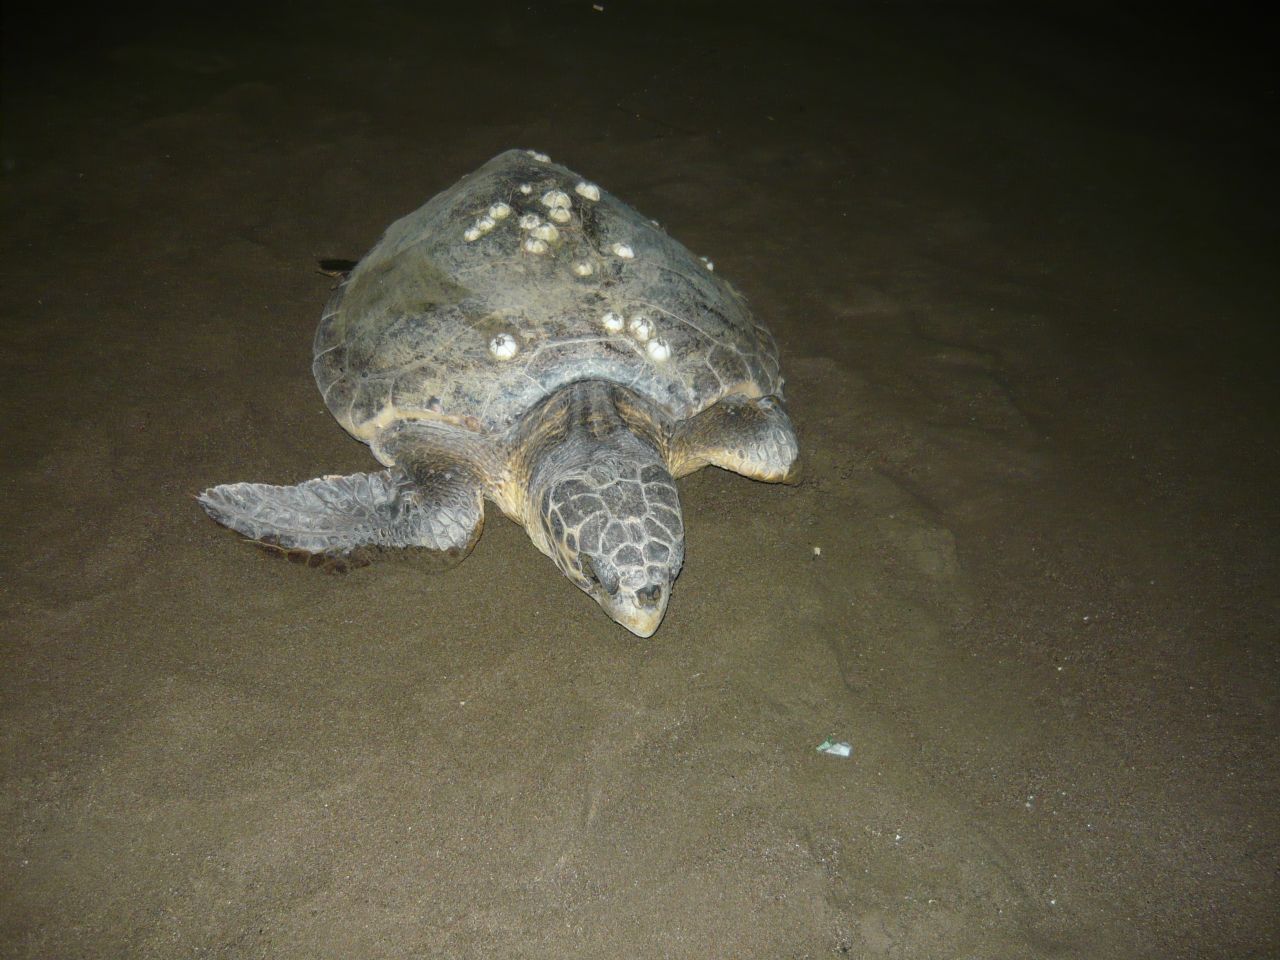 Measuring up to one meter in length, mature females return to Ituzu to lay their own eggs. About 300 females still bury their eggs in the sand each May.